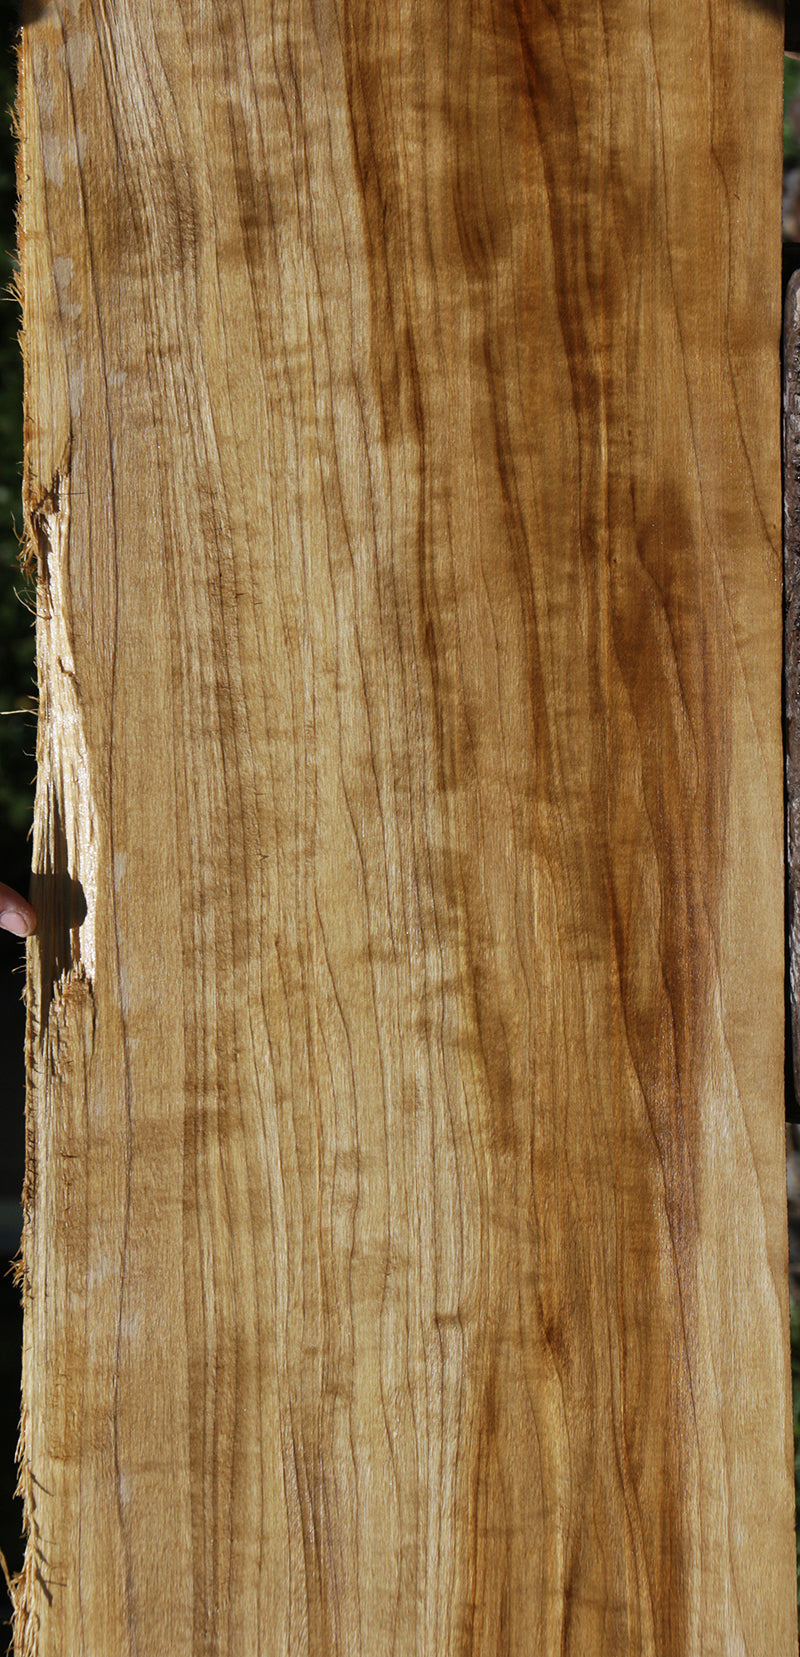 Fiddleback French Poplar Live Edge Lumber (Free Shipping Excluded)